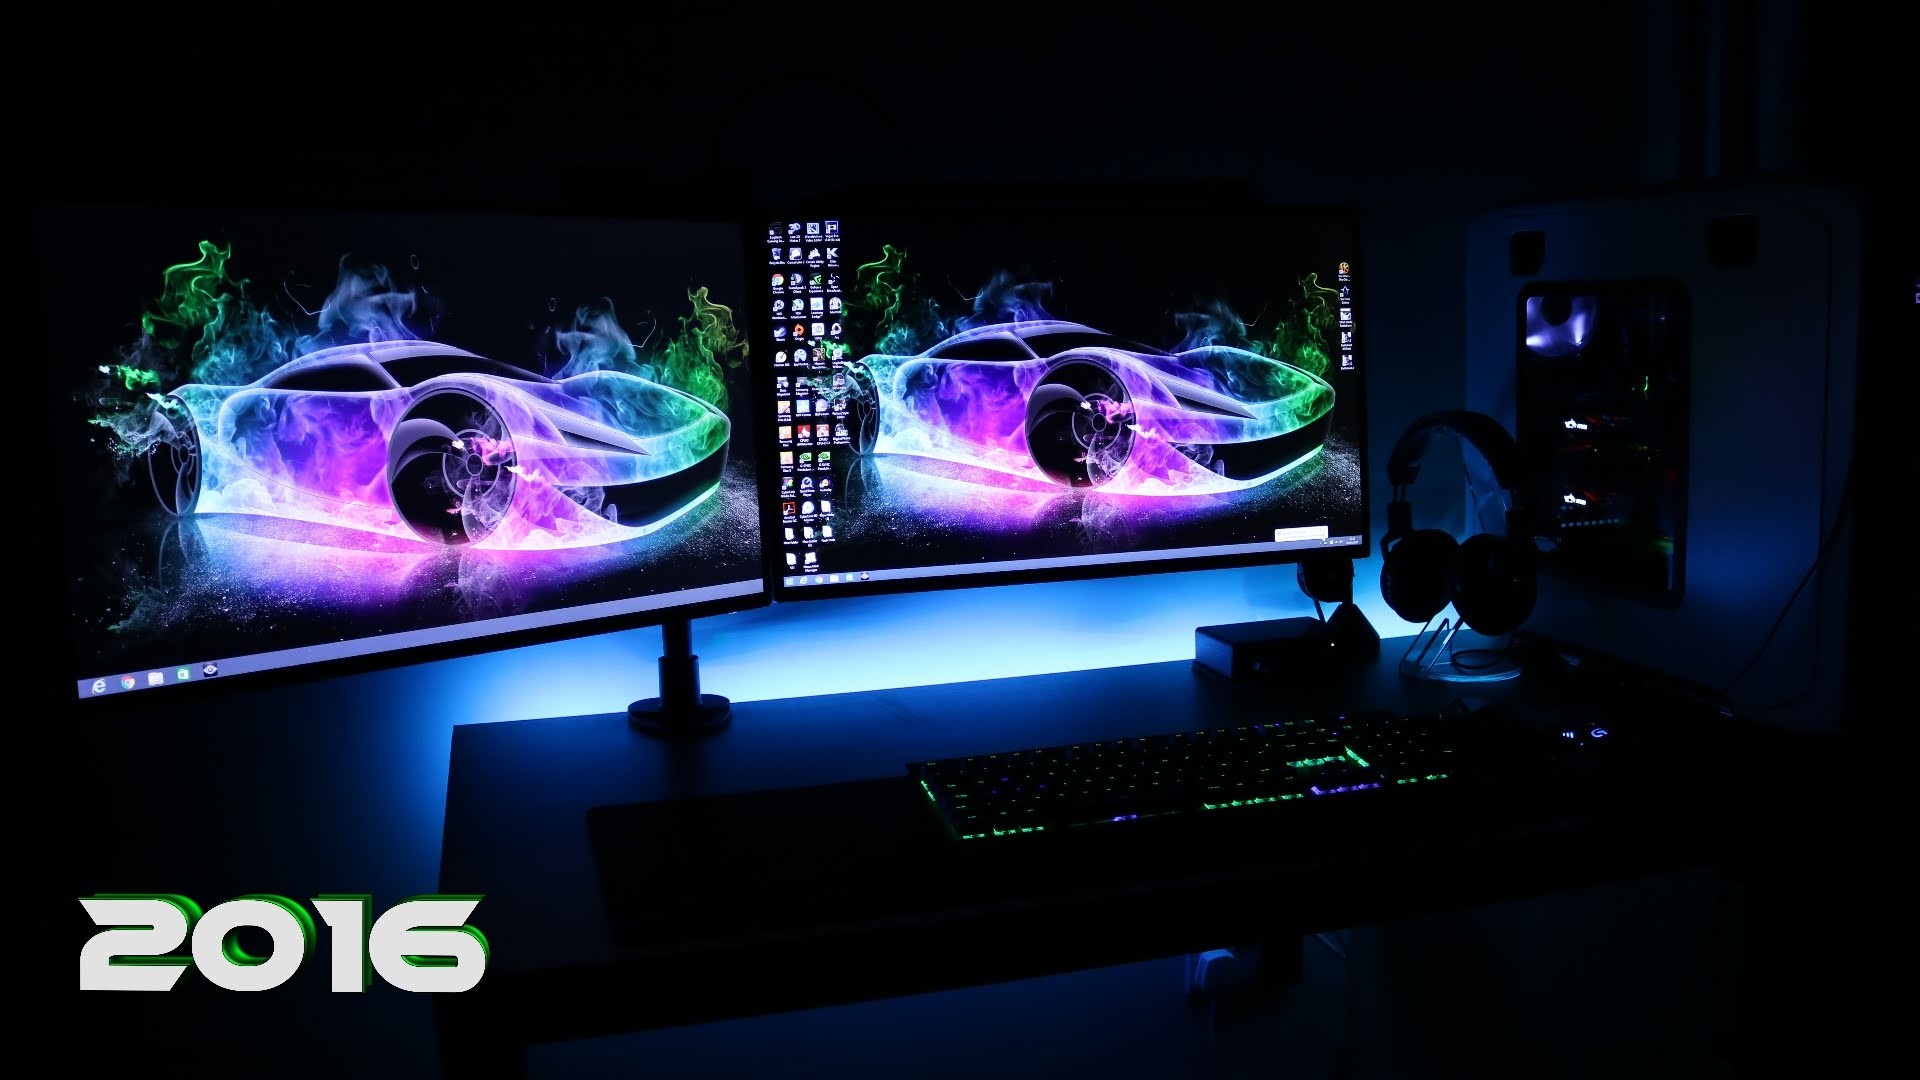 1920x1080 Ultimate Clean Gaming Setup 2016 Evolution, Dual Monitors, Gaming /  Workstation - YouTube